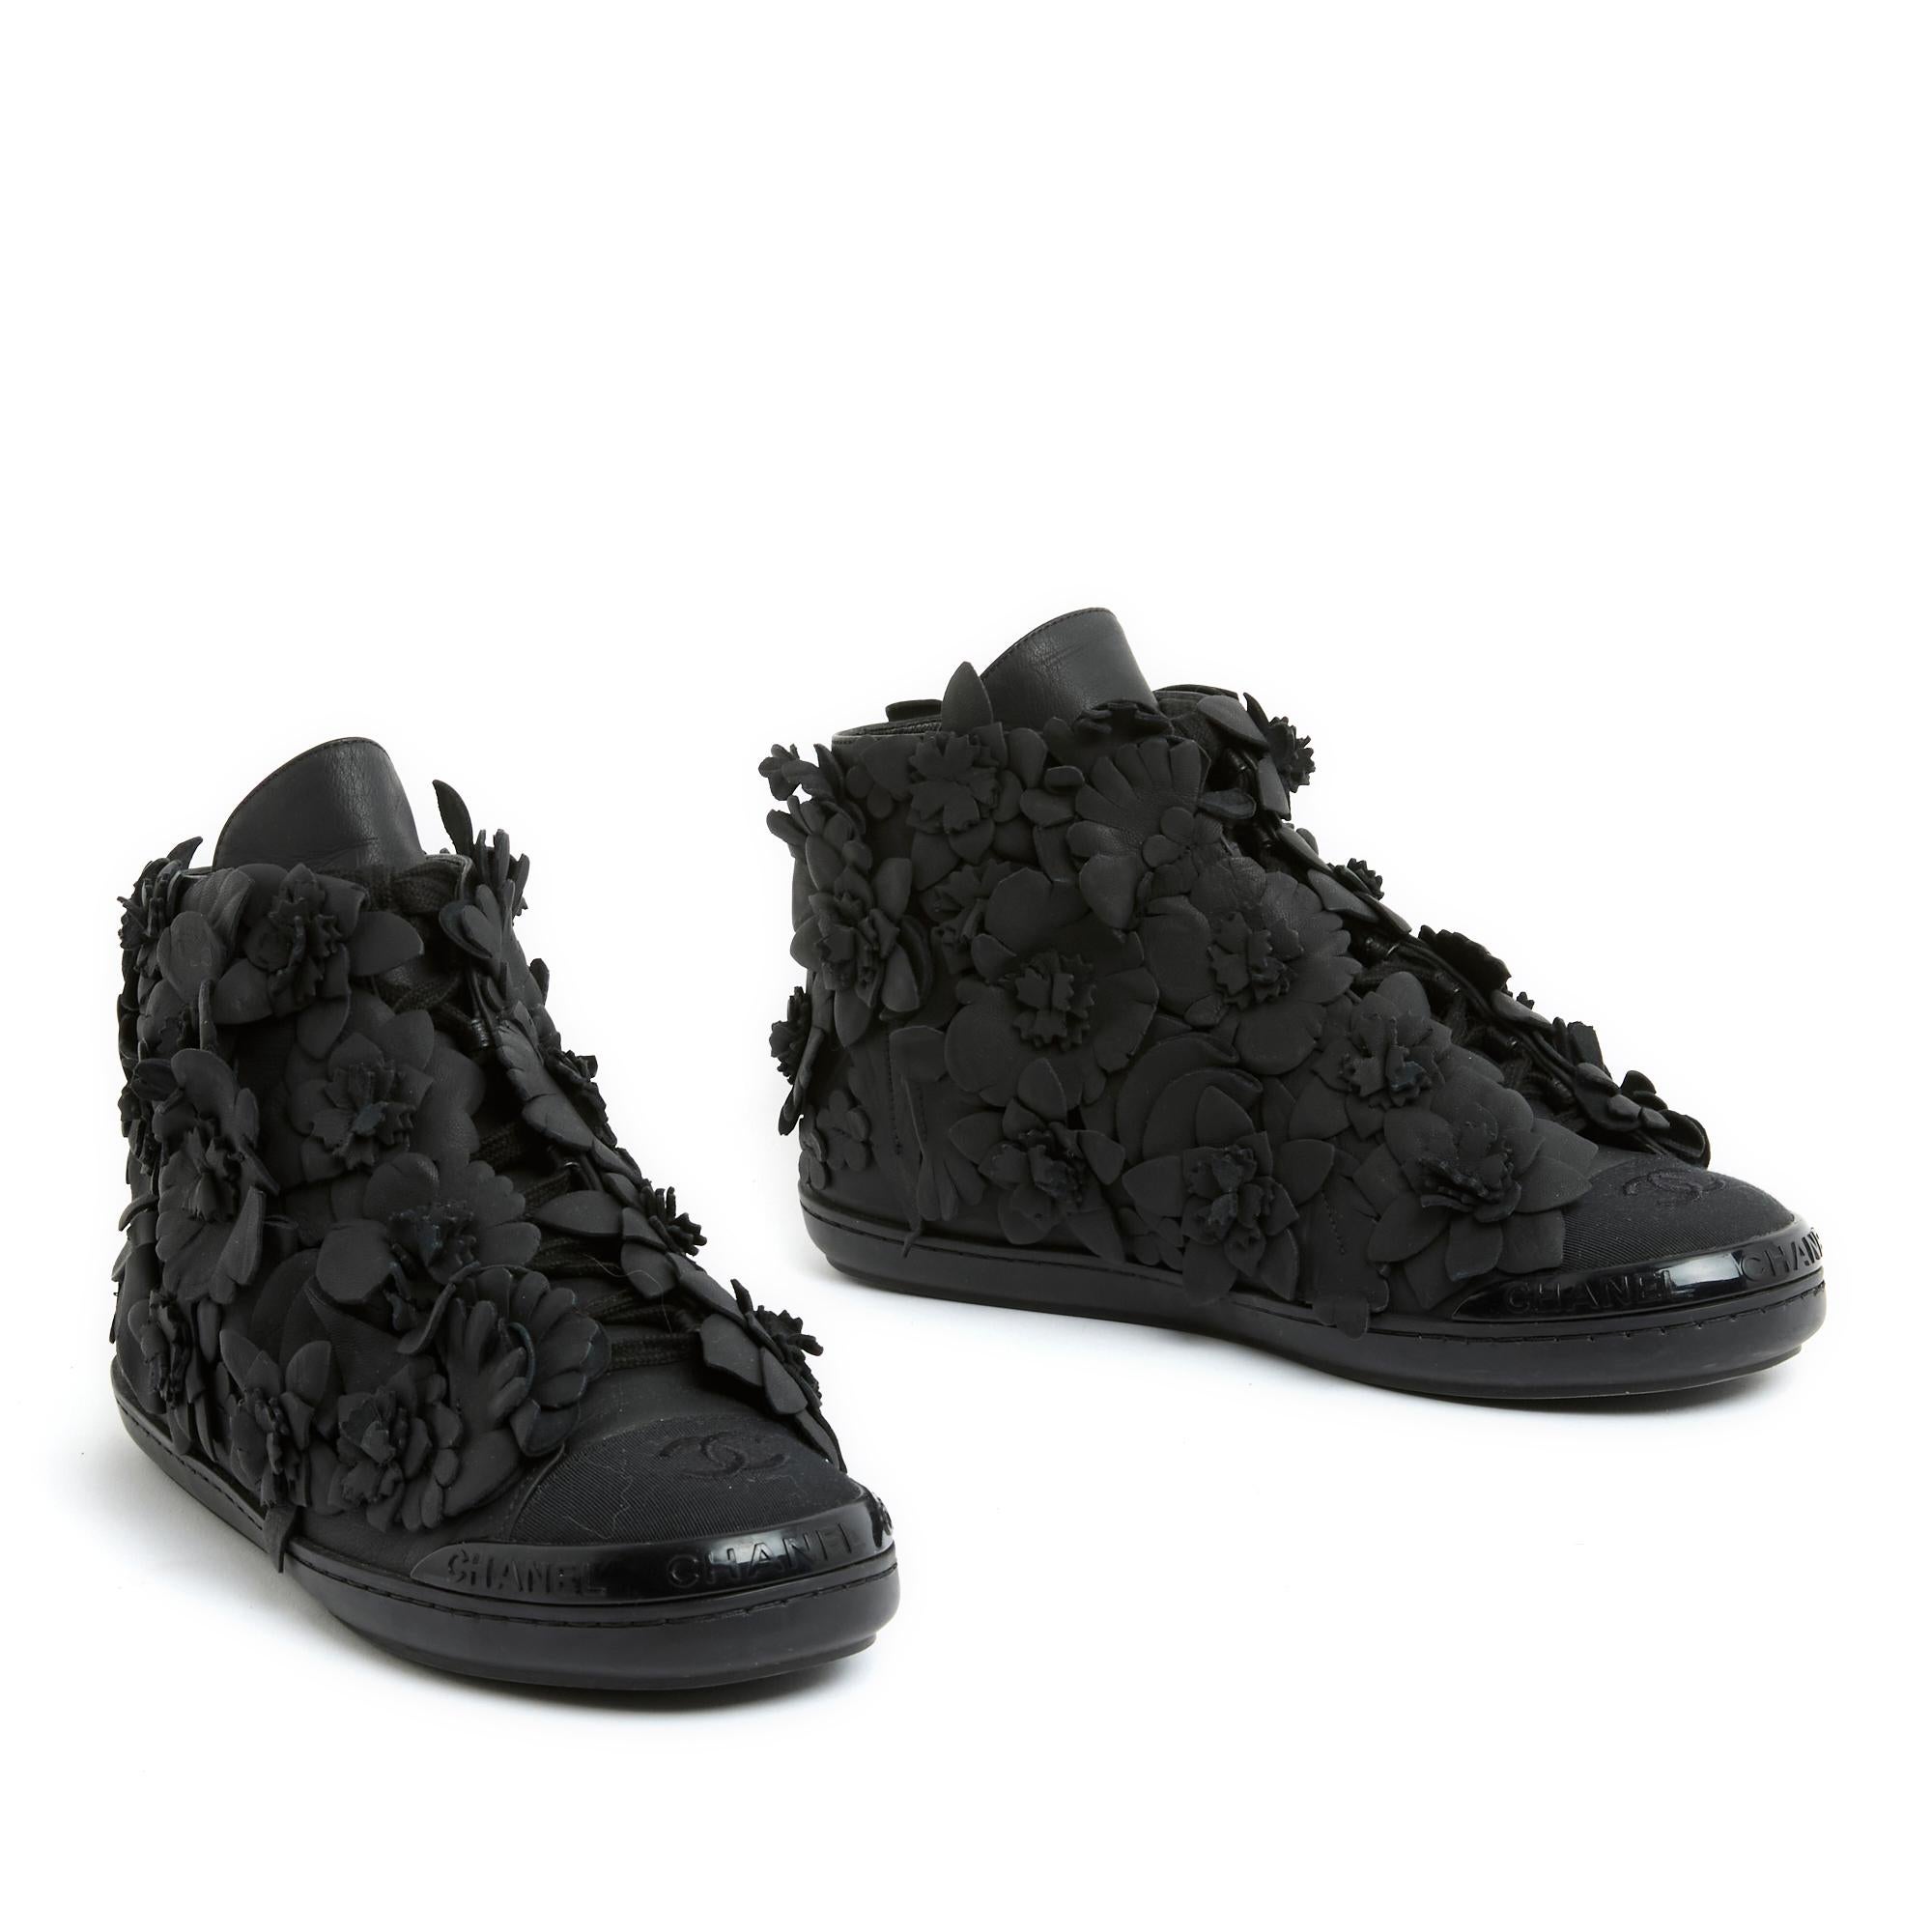 Chanel shoes high-top sneakers in black leather entirely covered with flowers of the same leather, rounded toe in black canvas embroidered with the CC logo, black rubber sole marked Chanel on the front, closure with a long lace on 7 loops. Size 38FR